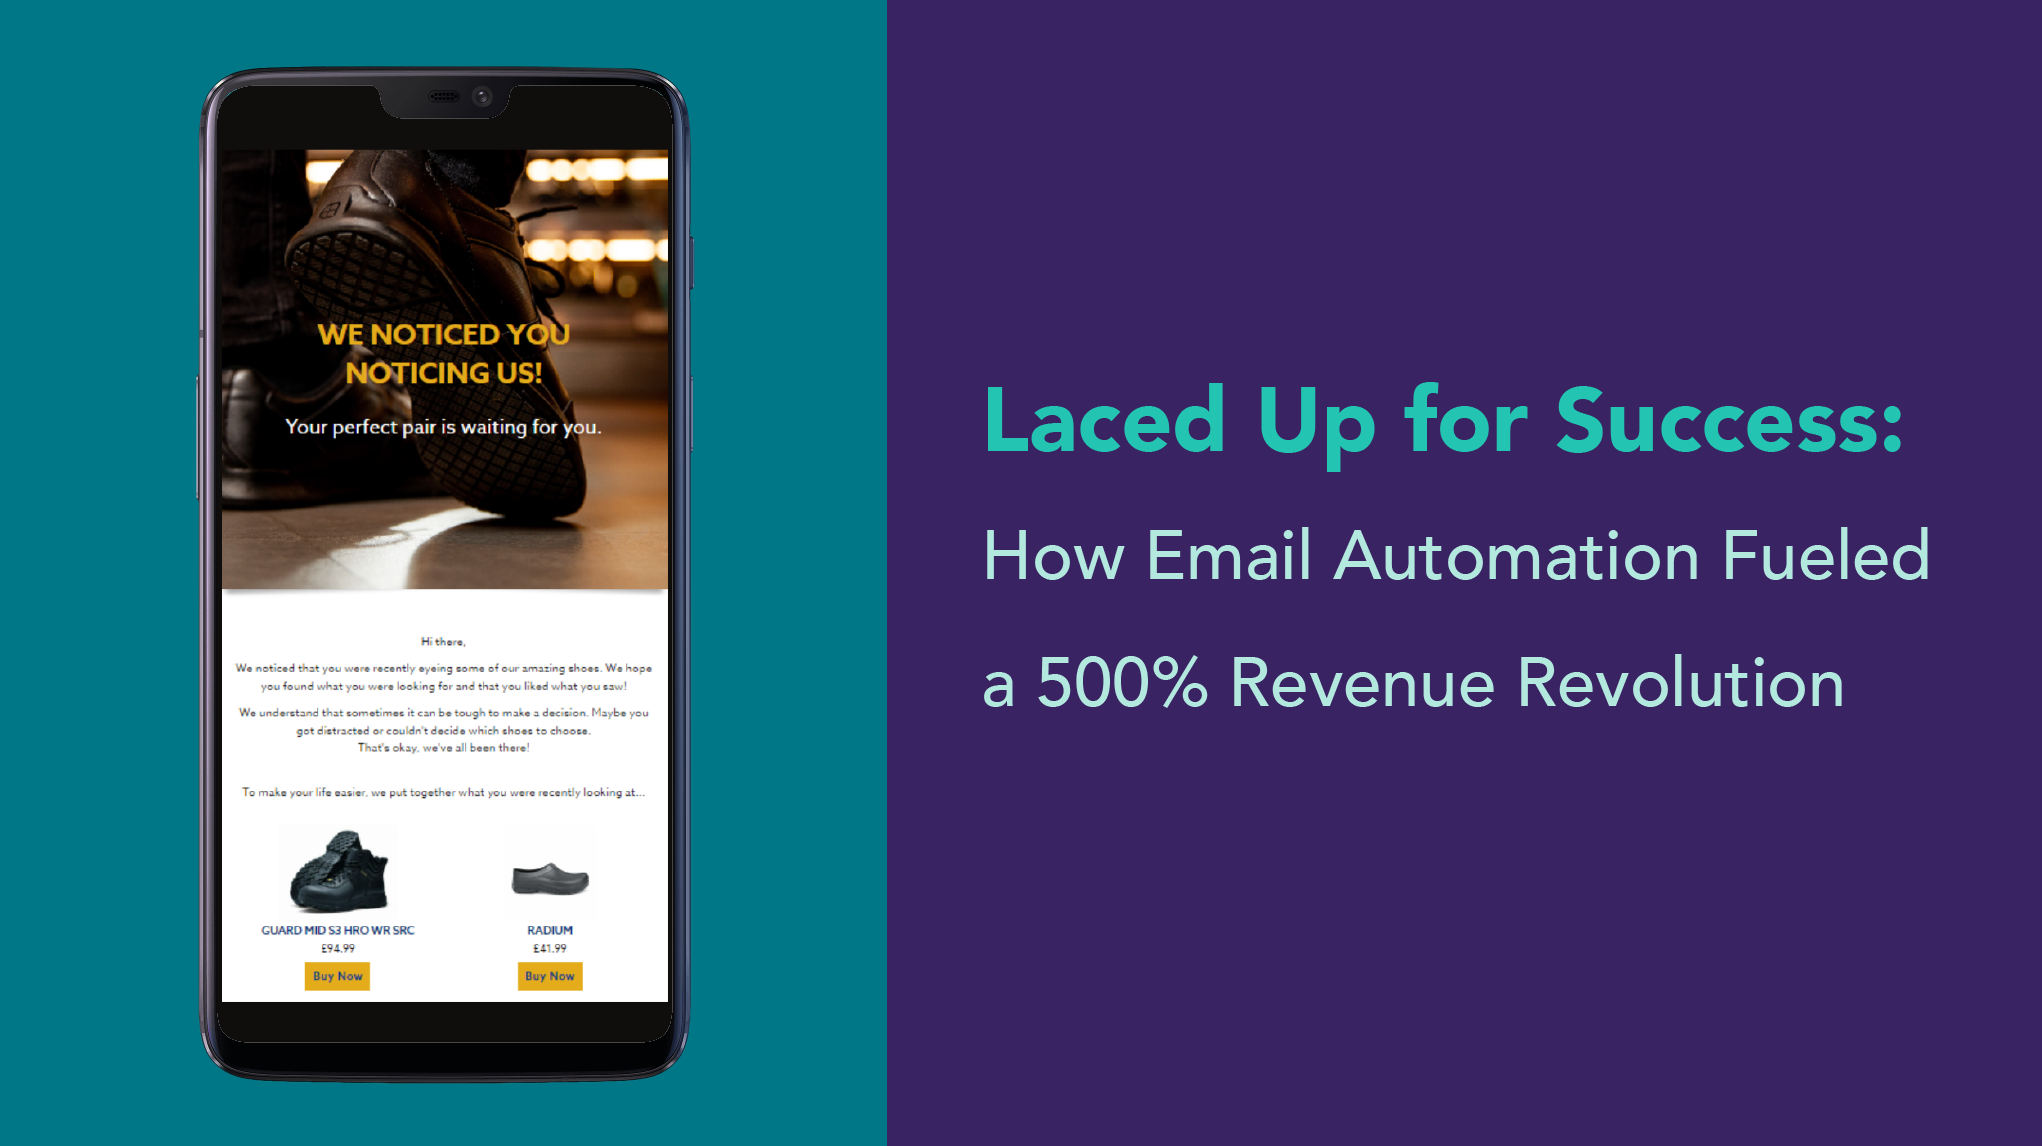 Laced Up for Success: How Email Automation Fueled a 500% Revenue Revolution